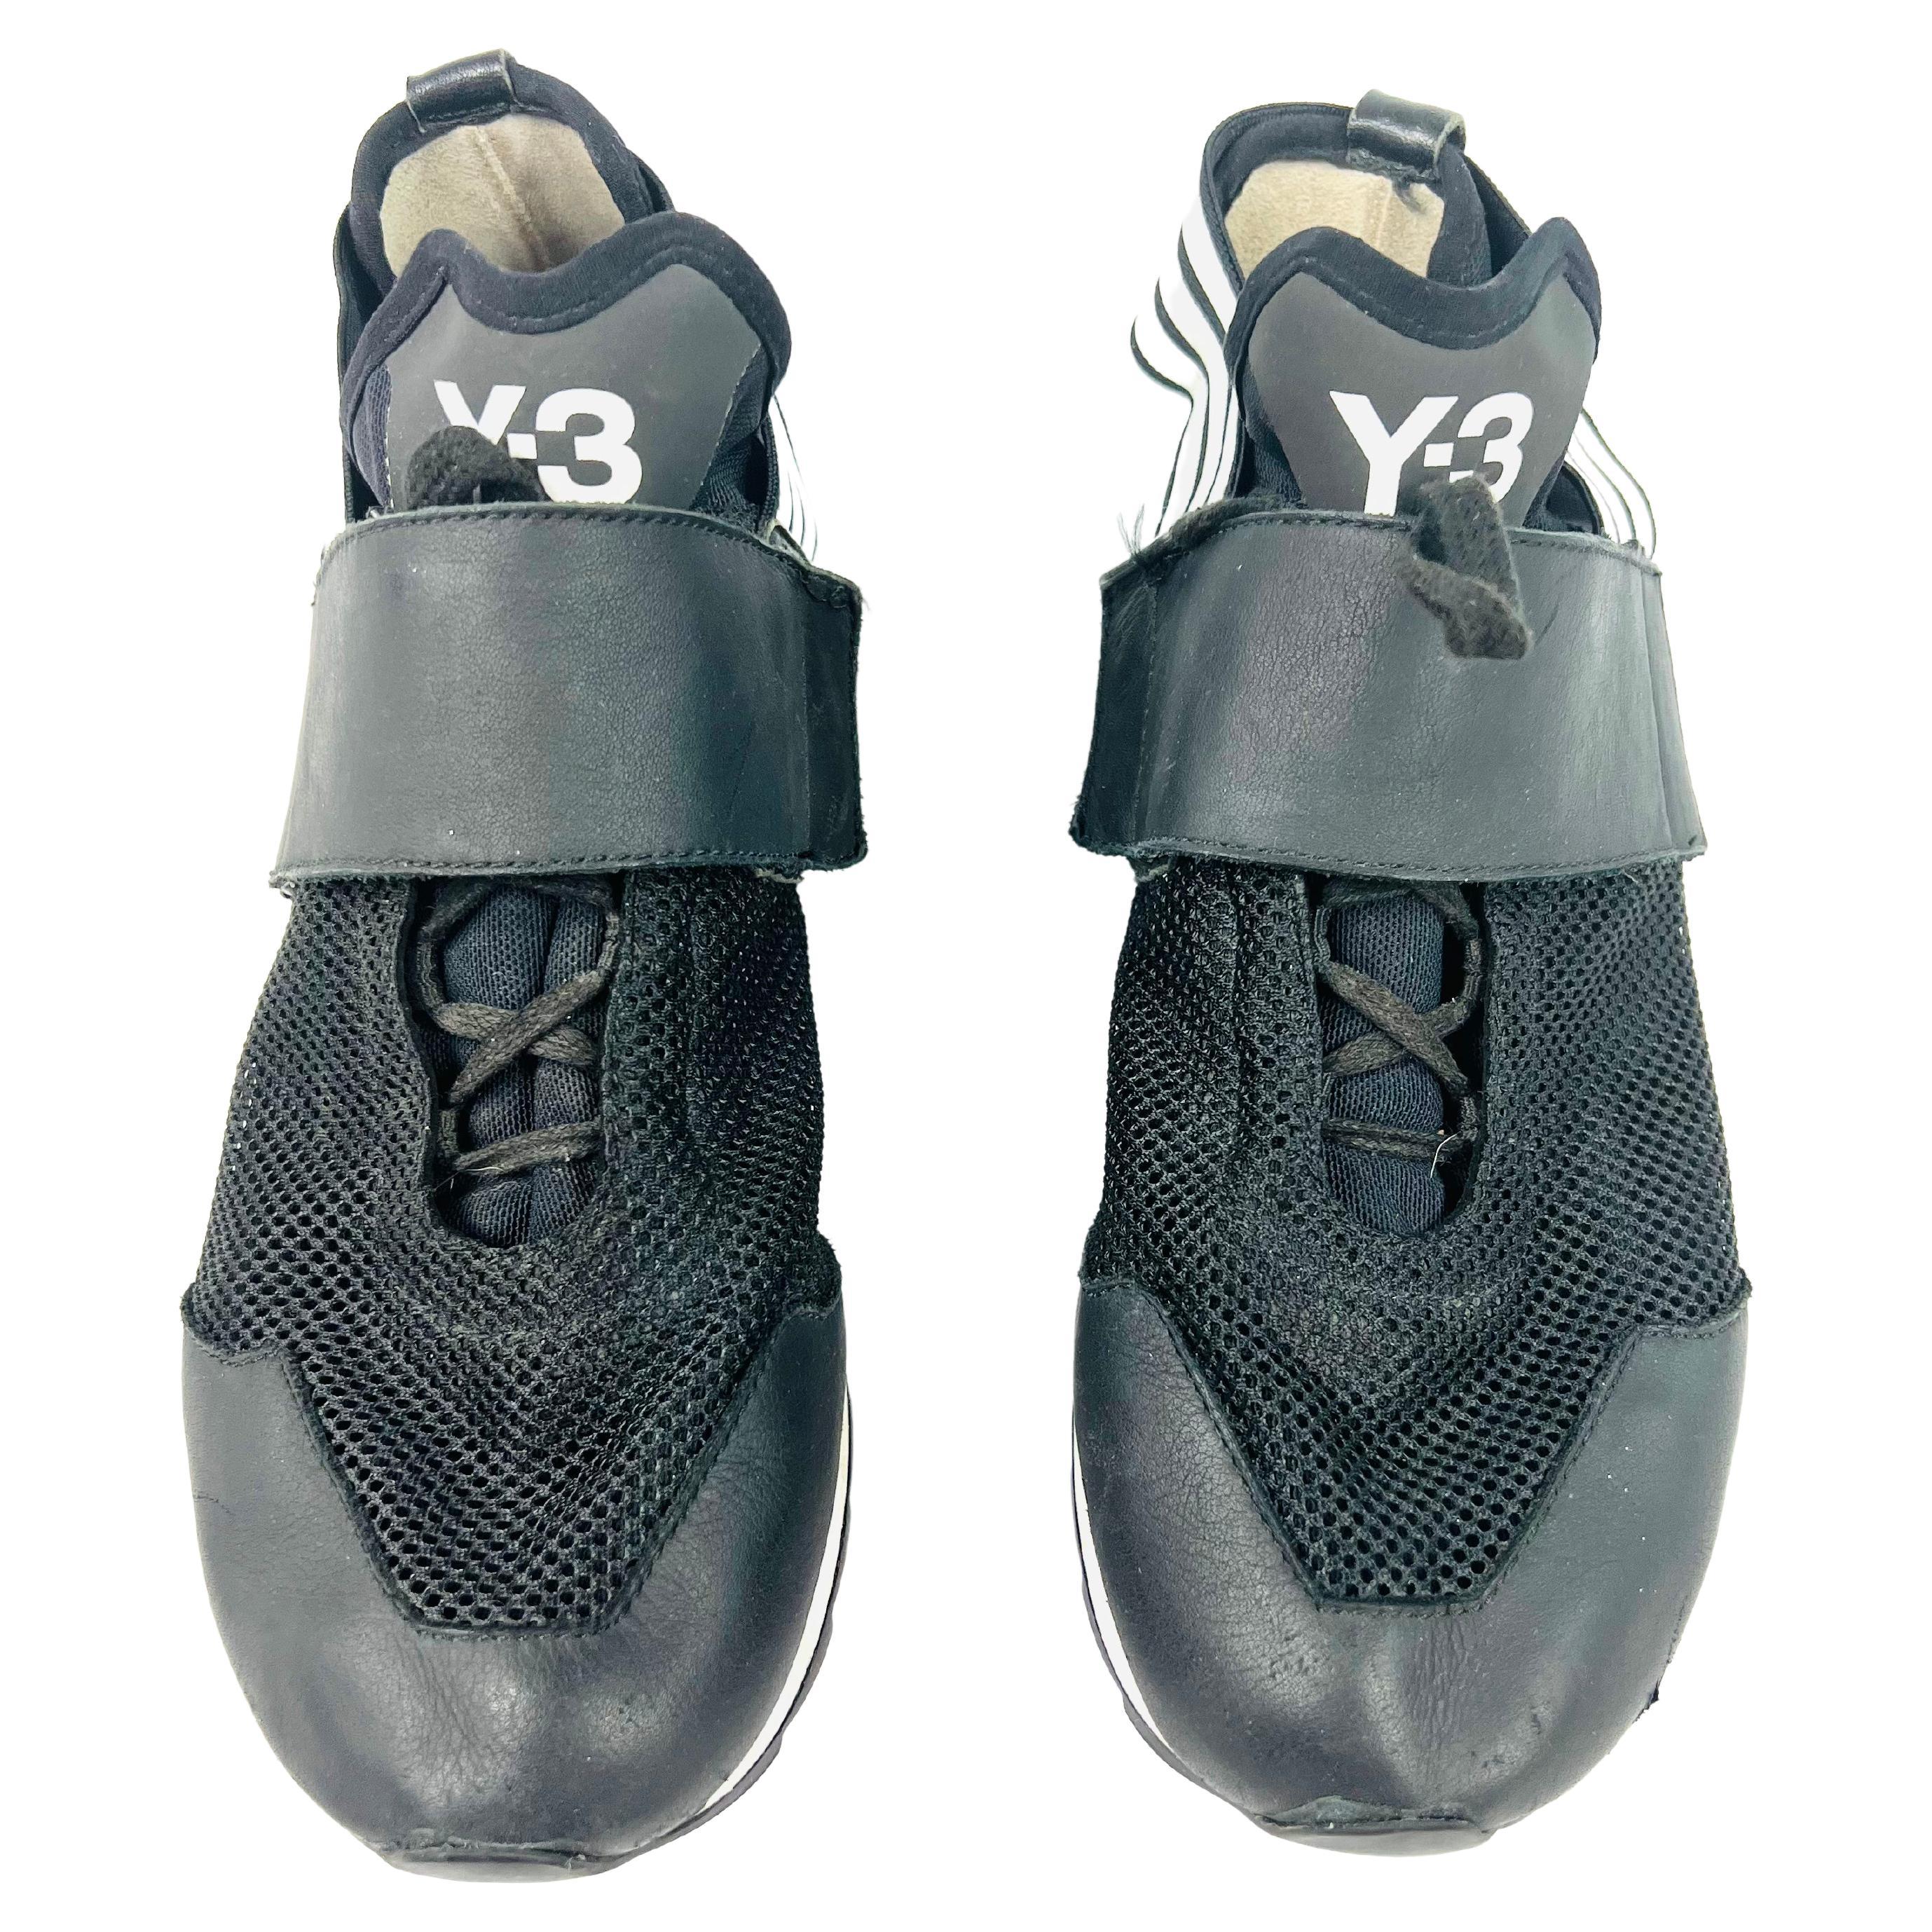 Y-3 Rhita Sport Black and White Sneakers, Size 38 For Sale